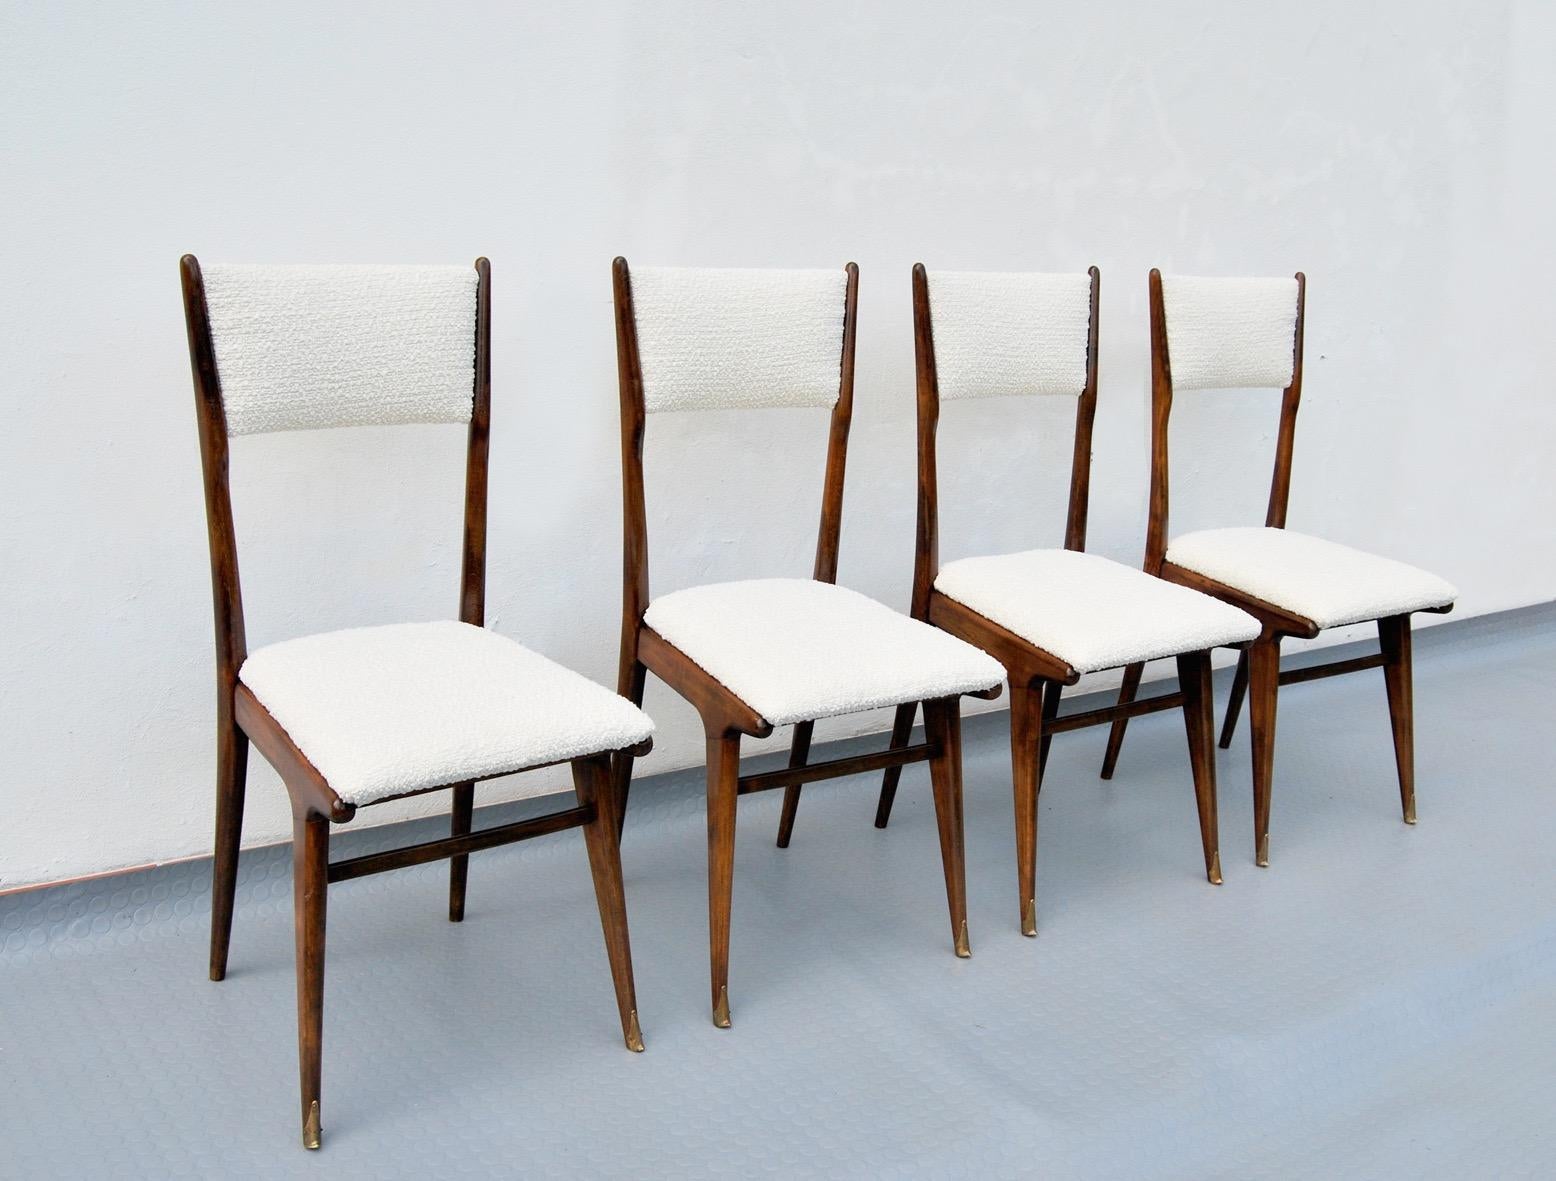 Midcentury Italian Carlo de Carli for Cassina Chairs - Set of 4, 1958 For Sale 1